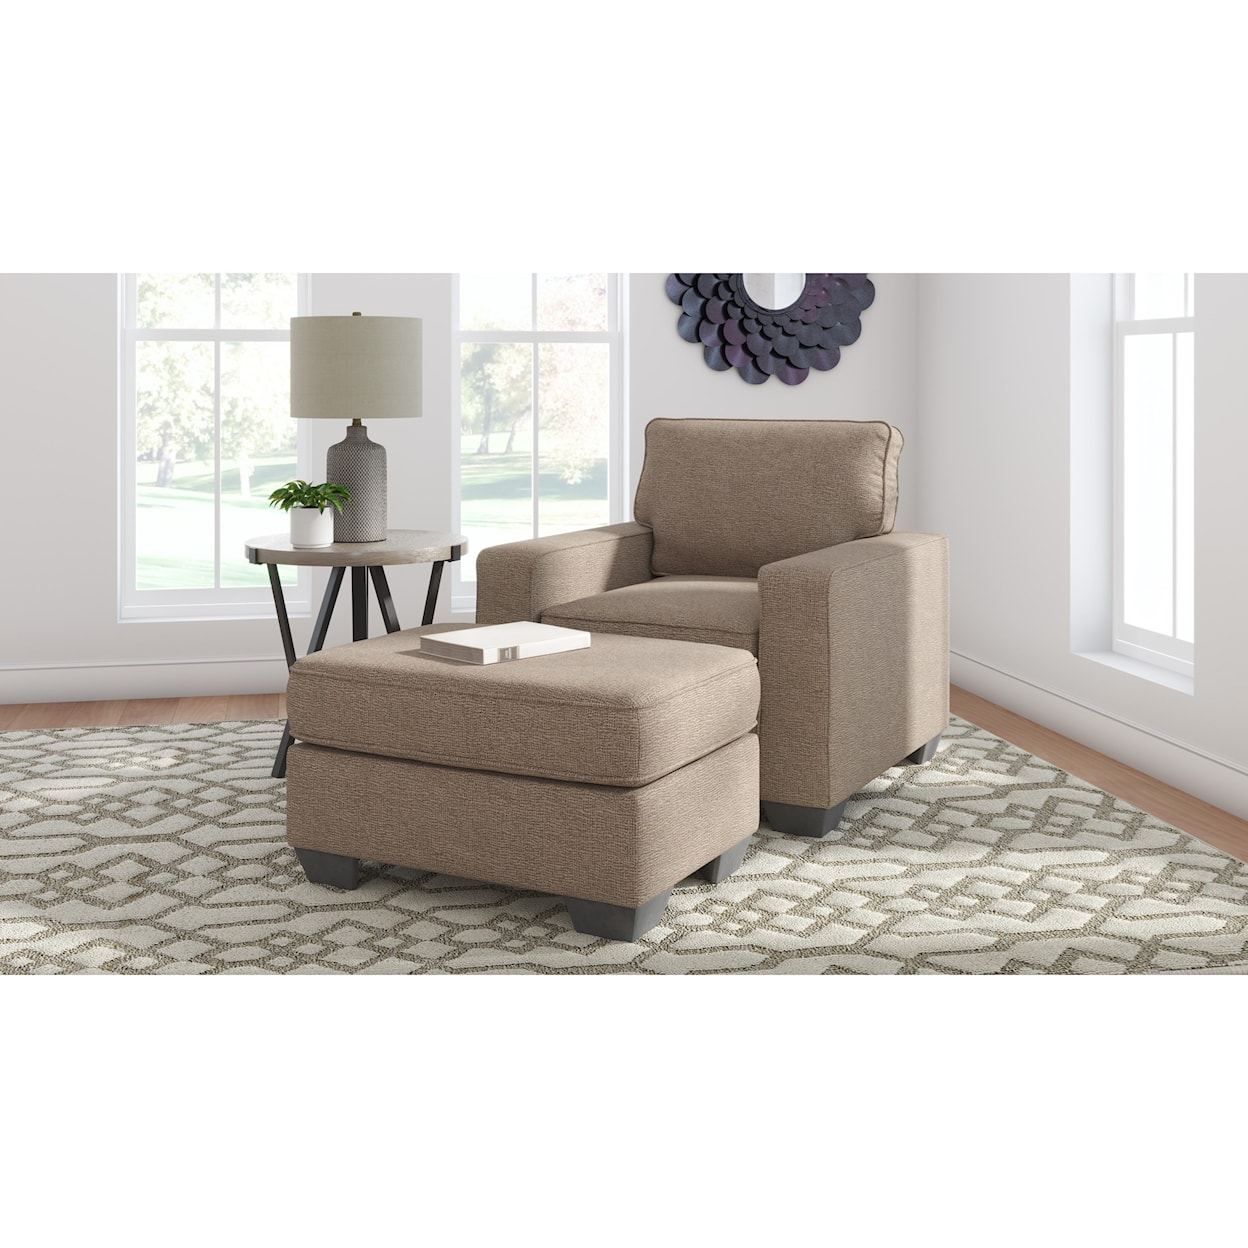 Signature Design by Ashley Furniture Greaves Ottoman